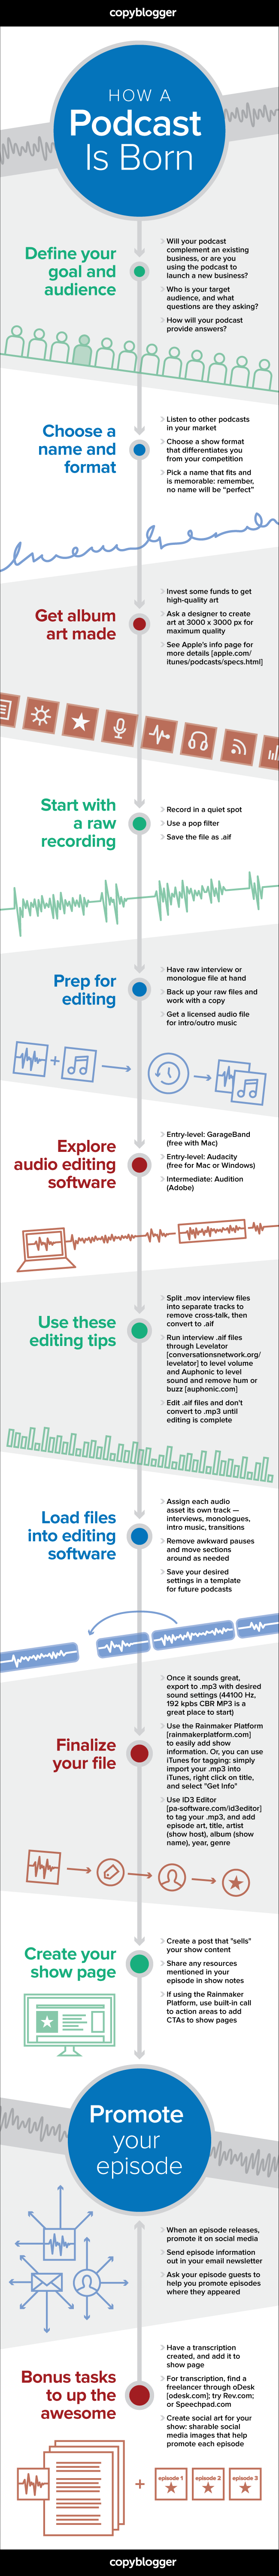 How a Podcast Is Born [Infographic]